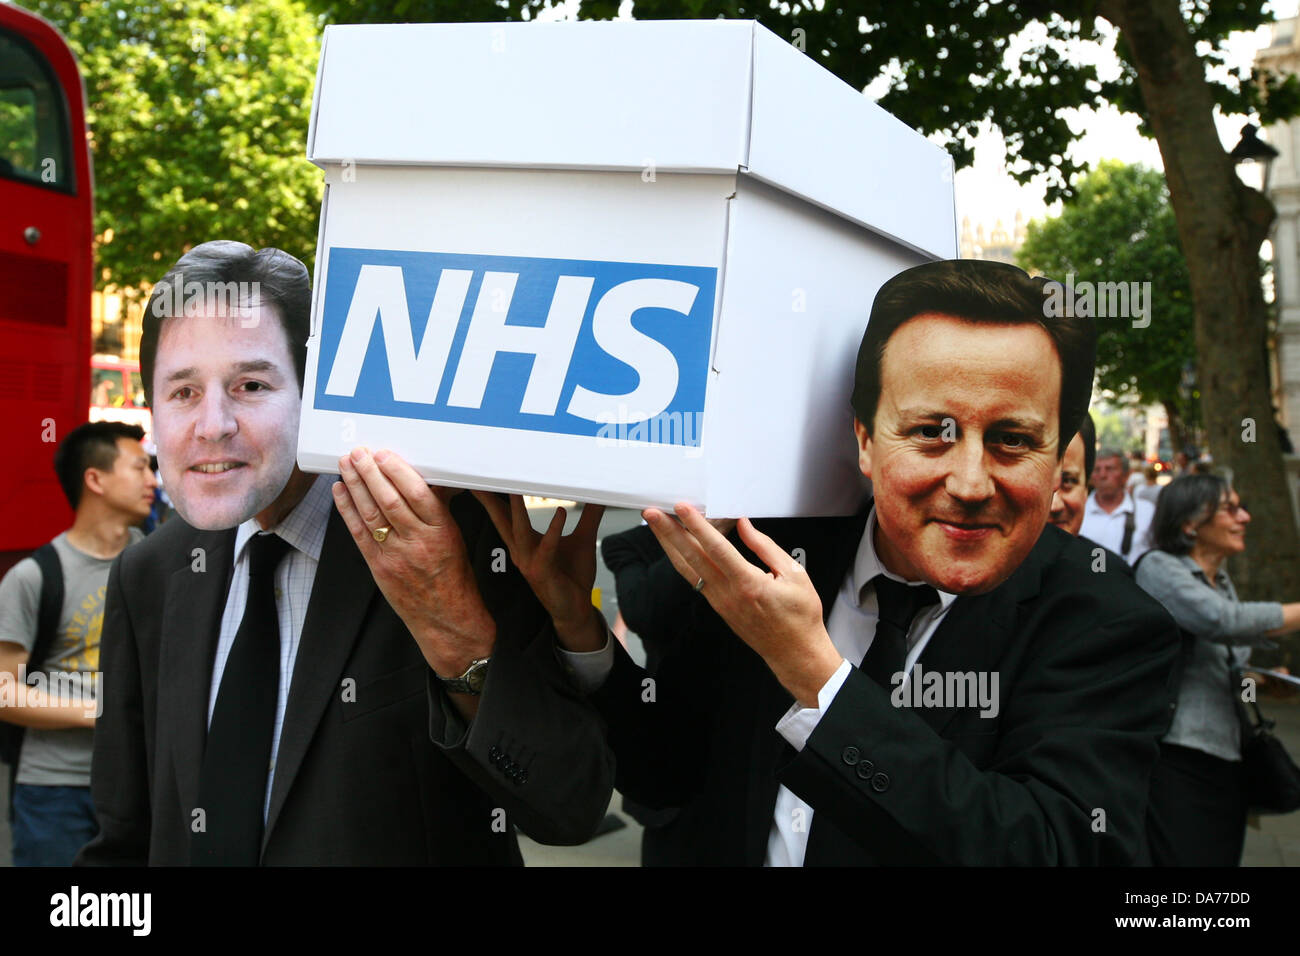 London, UK. 5th July, 2013. Medical staff march with a coffin to Downing Street to protest privatisation NHS on the 65th anniversary of it's founding  Credit:  Mario Mitsis / Alamy Live News Stock Photo